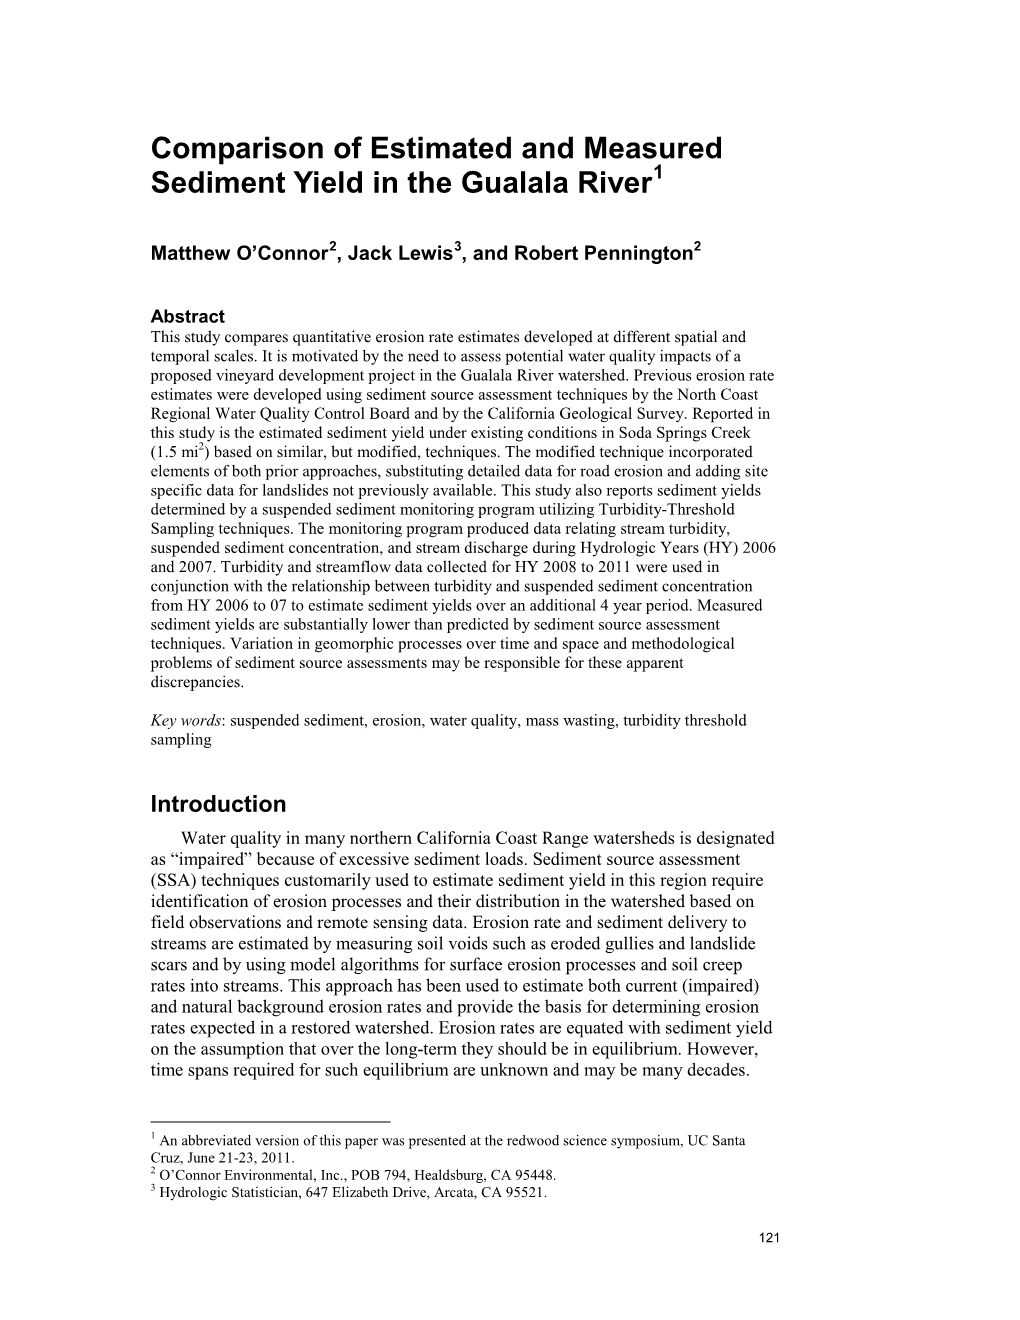 Comparison of Estimated and Measured Sediment Yield in the Gualala River1